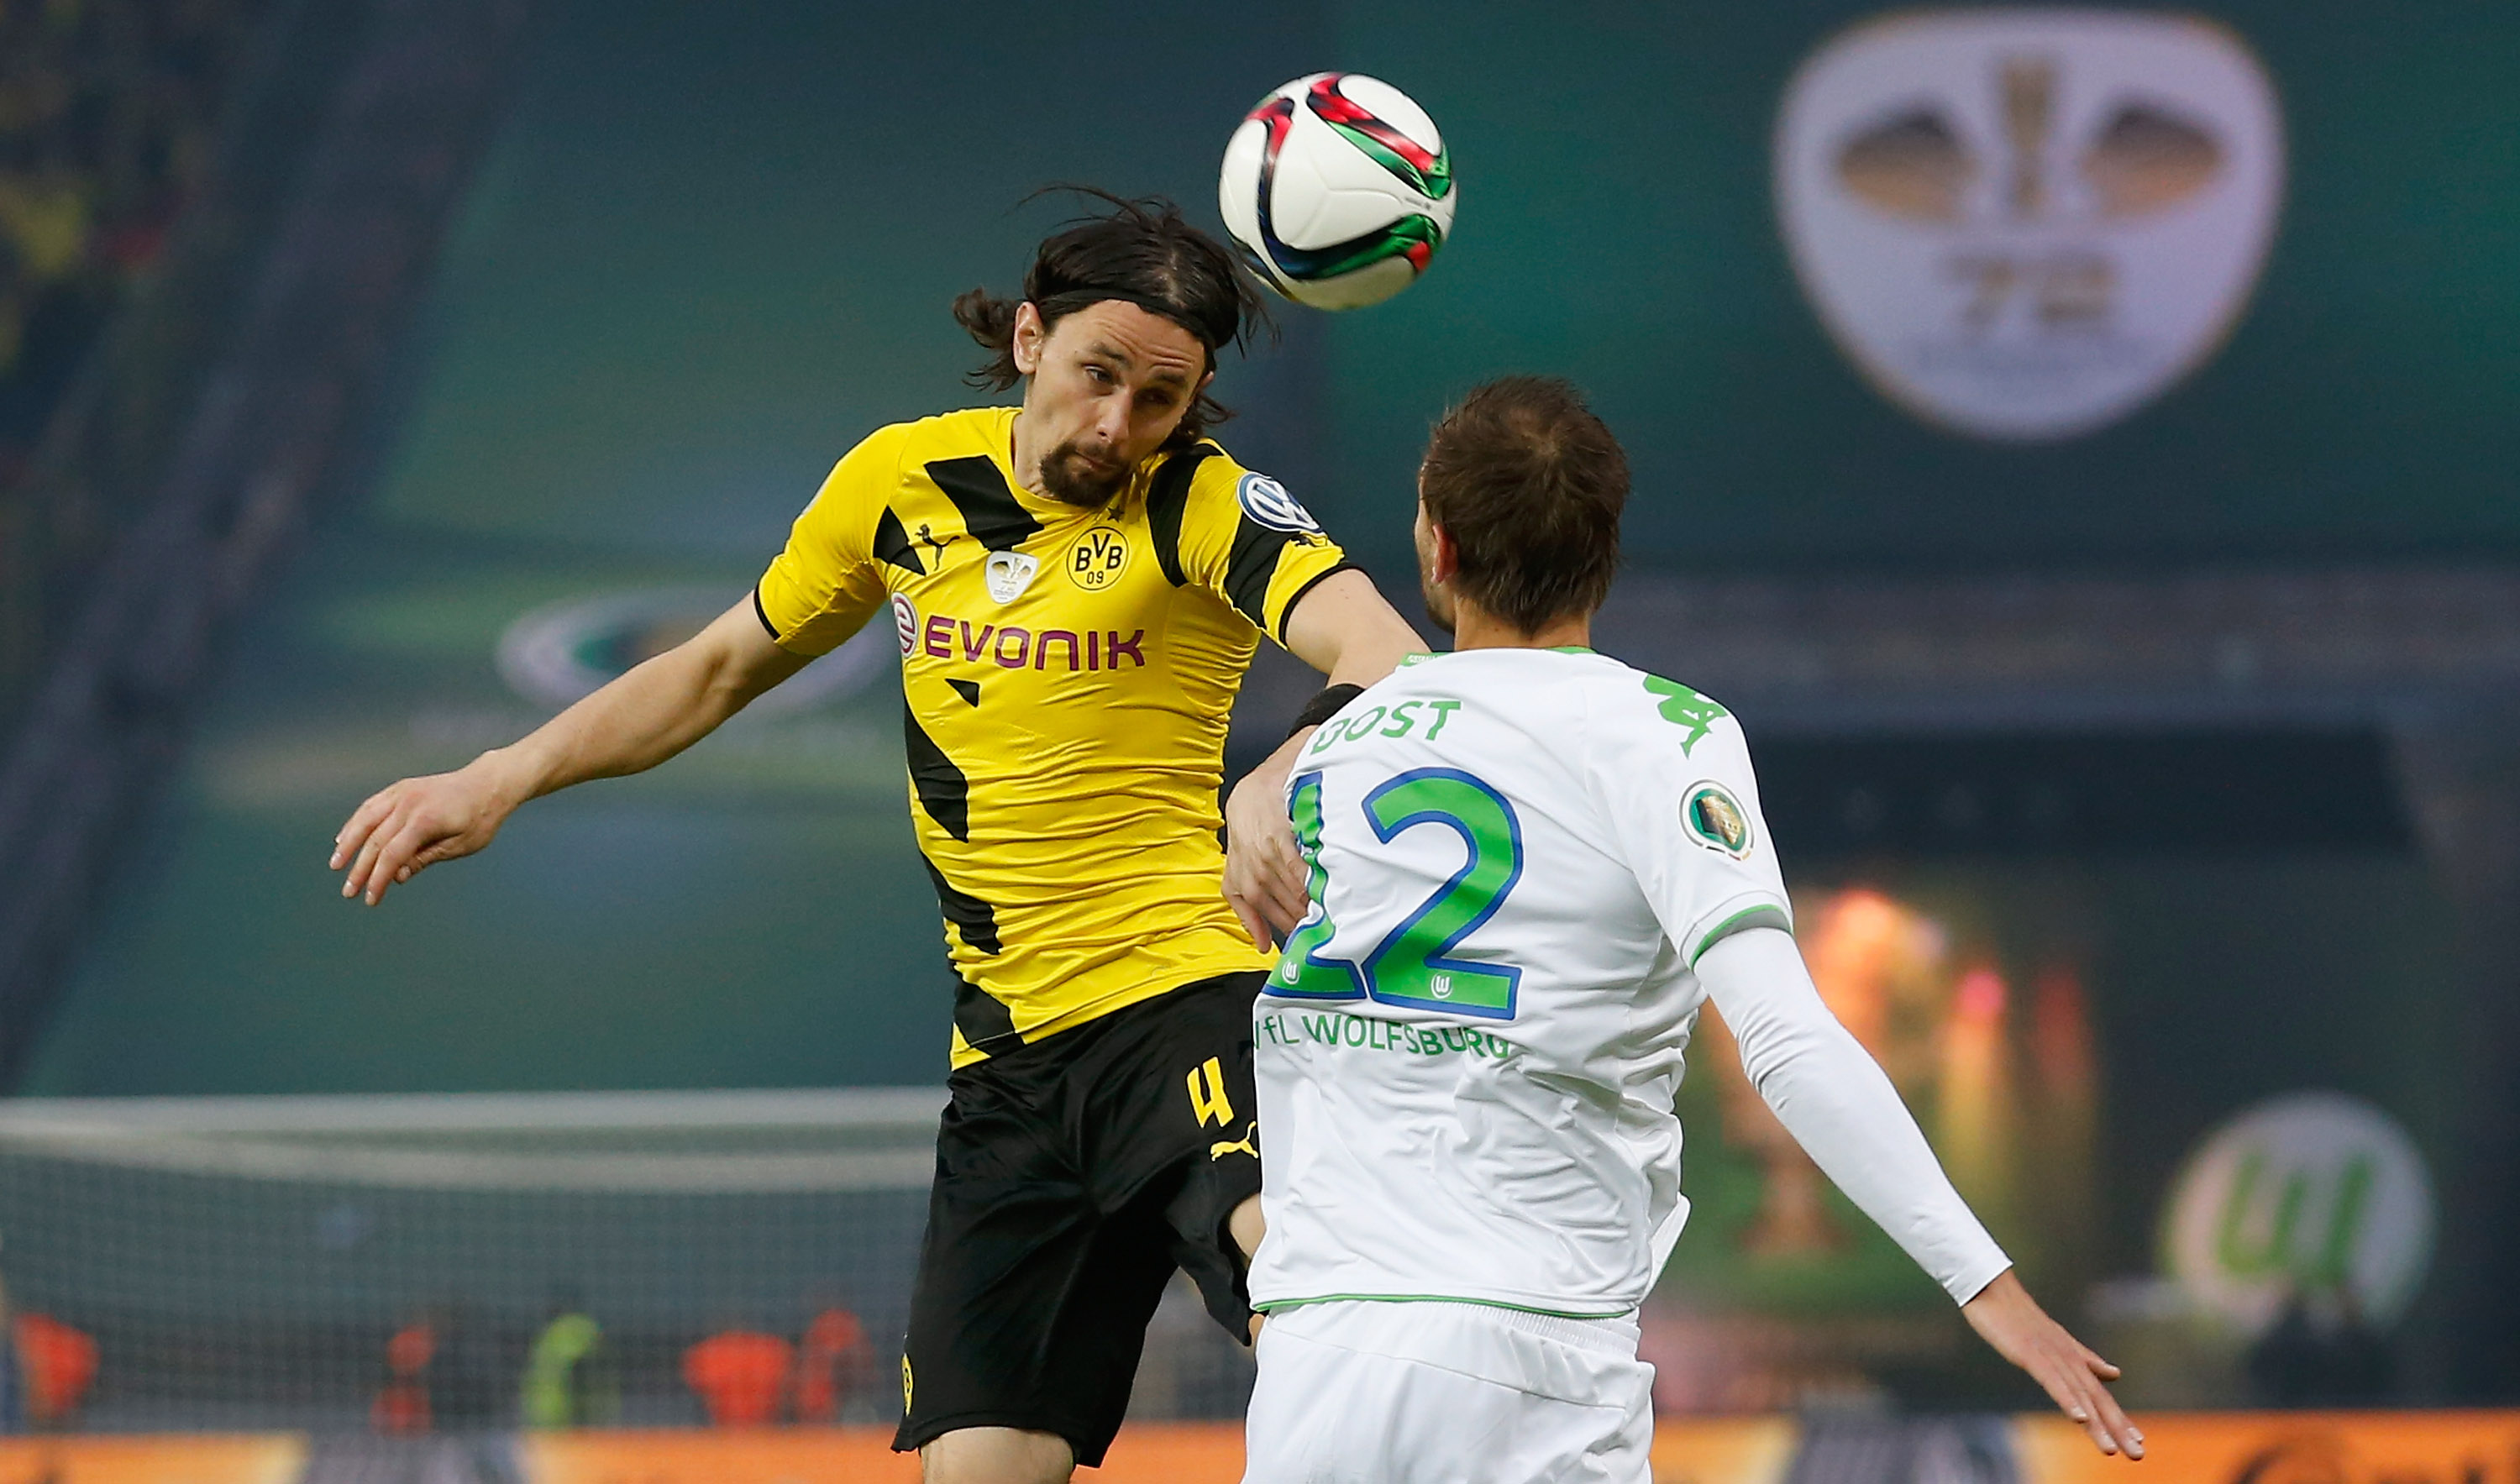 BERLIN, GERMANY - MAY 30:  Neven Subotic (L) of Dortmund jumps for a header with Bas Dost of Wolfsburg during the DFB Cup Final match between Borussia Dortmund and VfL Wolfsburg at Olympiastadion on May 30, 2015 in Berlin, Germany.  (Photo by Boris Streubel/Bongarts/Getty Images)